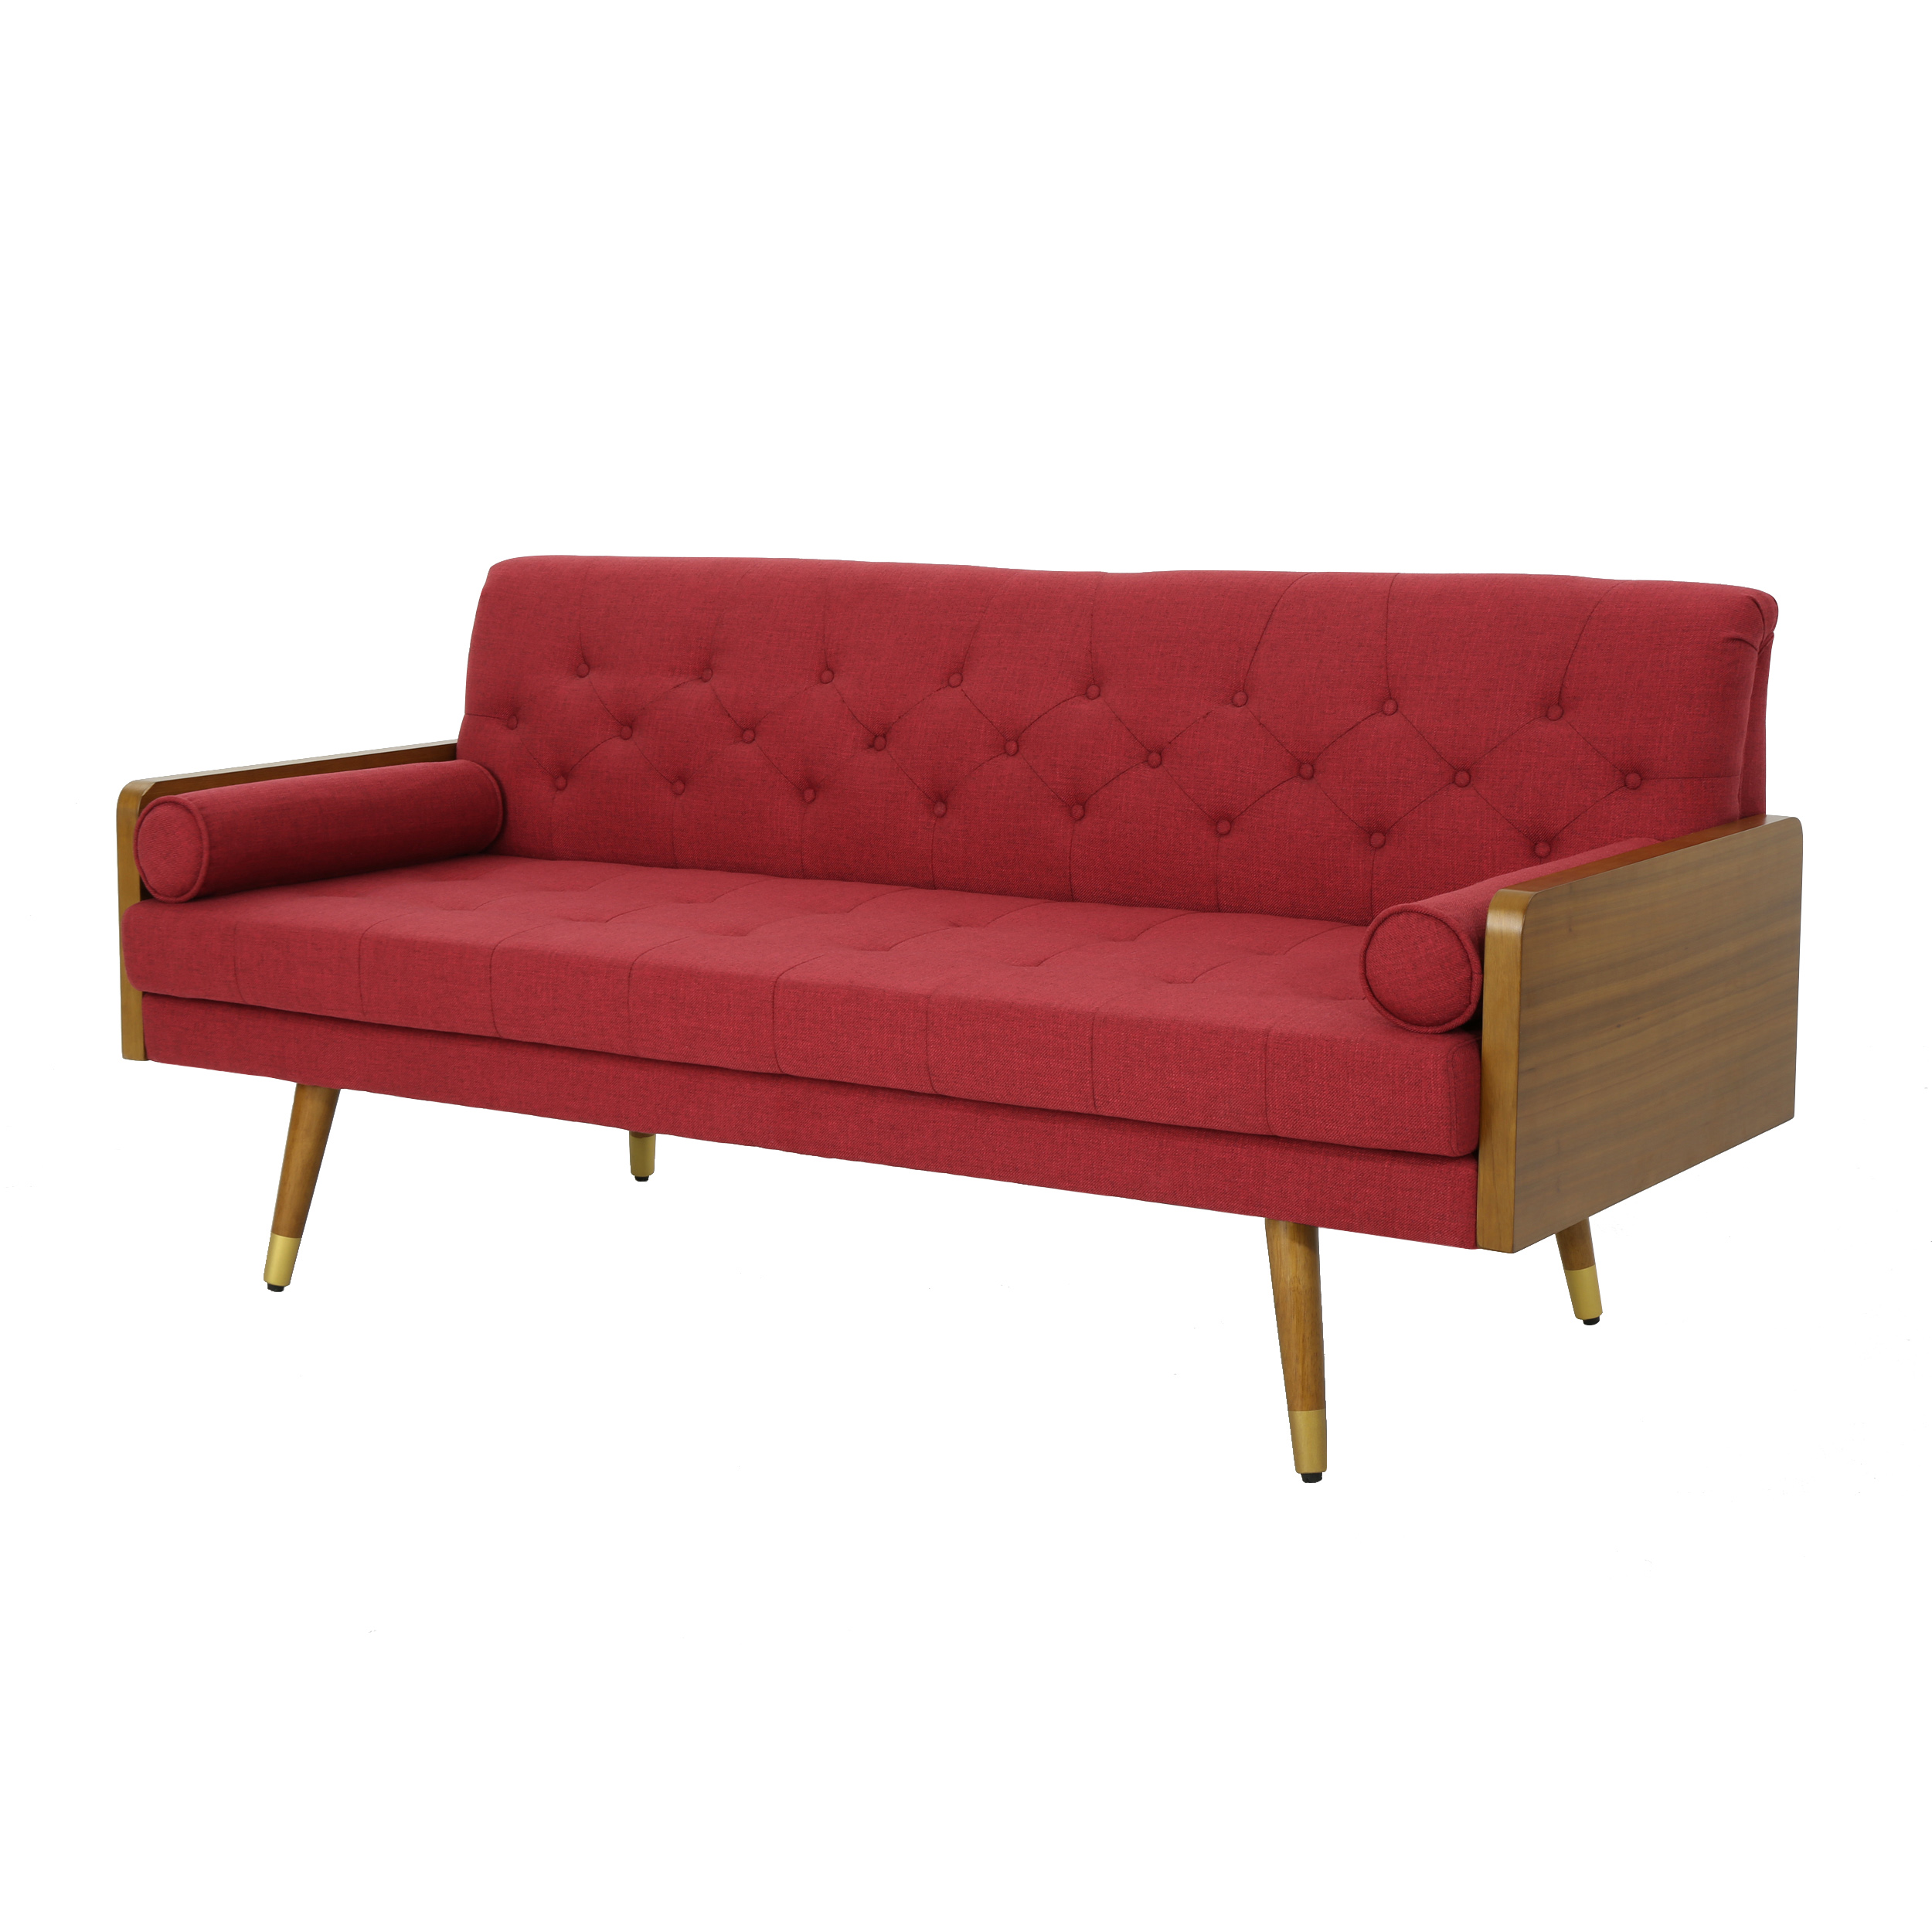 Demuir Mid Century Modern Tufted Fabric Sofa with Rolled Accent Pillows, Red - image 1 of 10